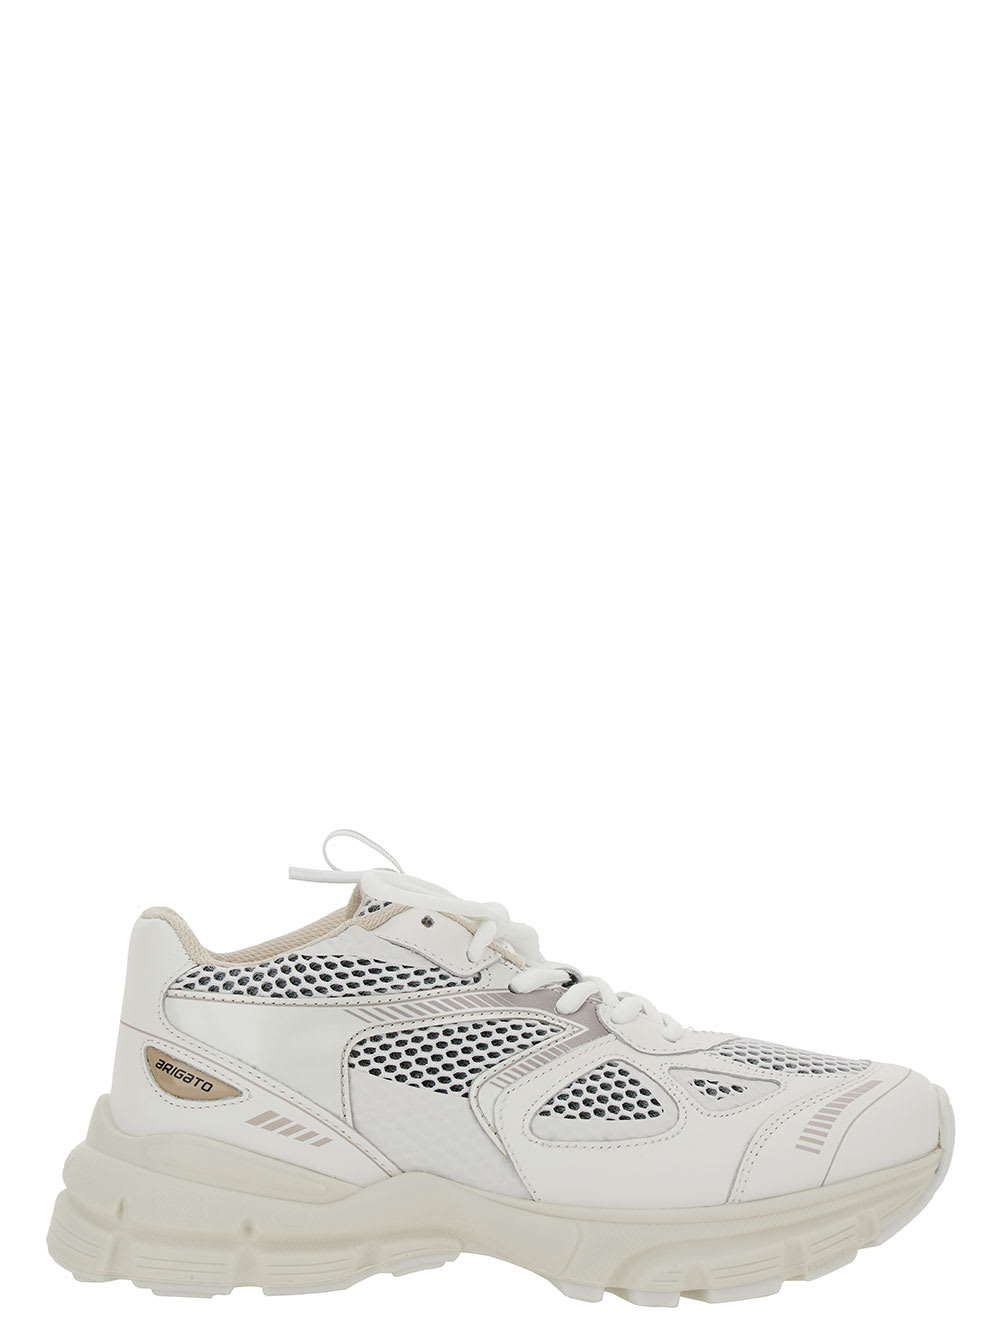 Axel Arigato Marathon Runner White Low Top Sneakers With Reflective Details In Leather Blend Woman